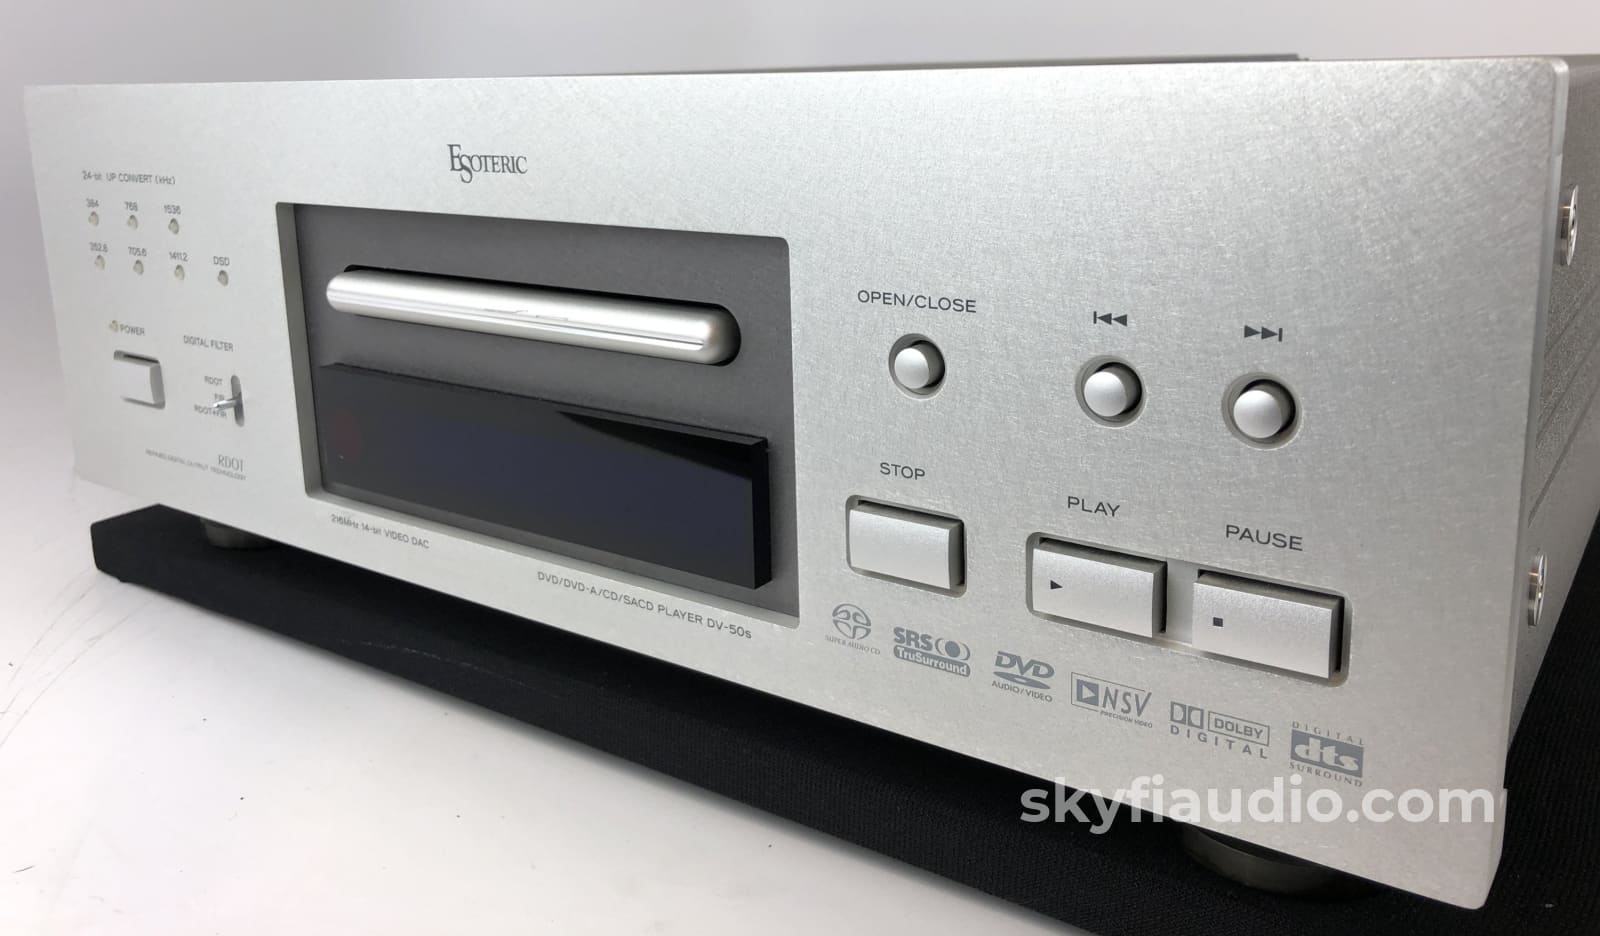 Esoteric DV-50s SACD/CD Player with Remote